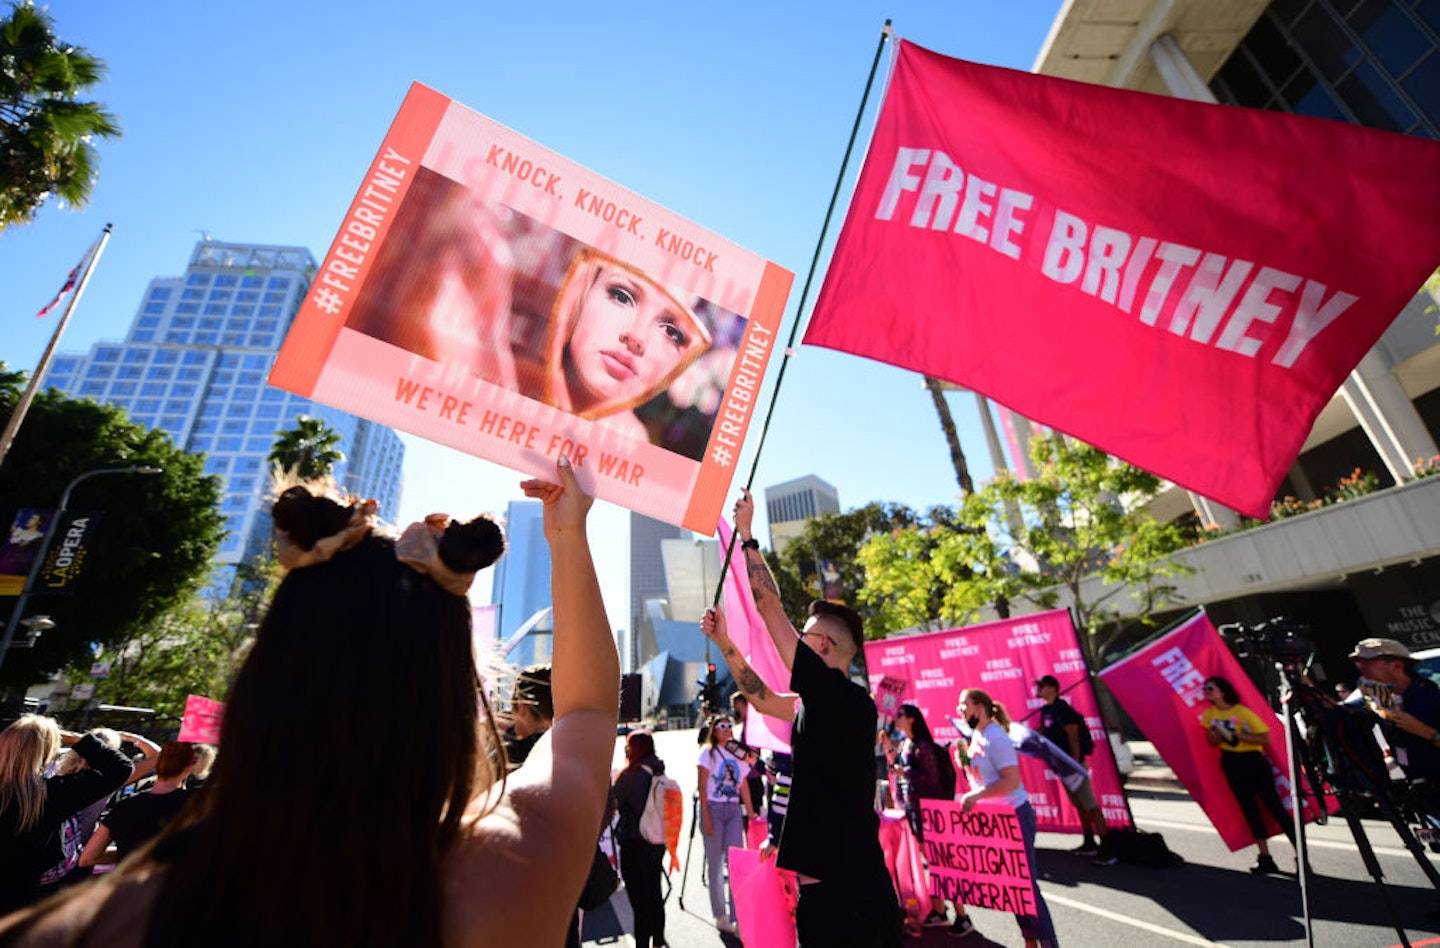 free britney protests 2021